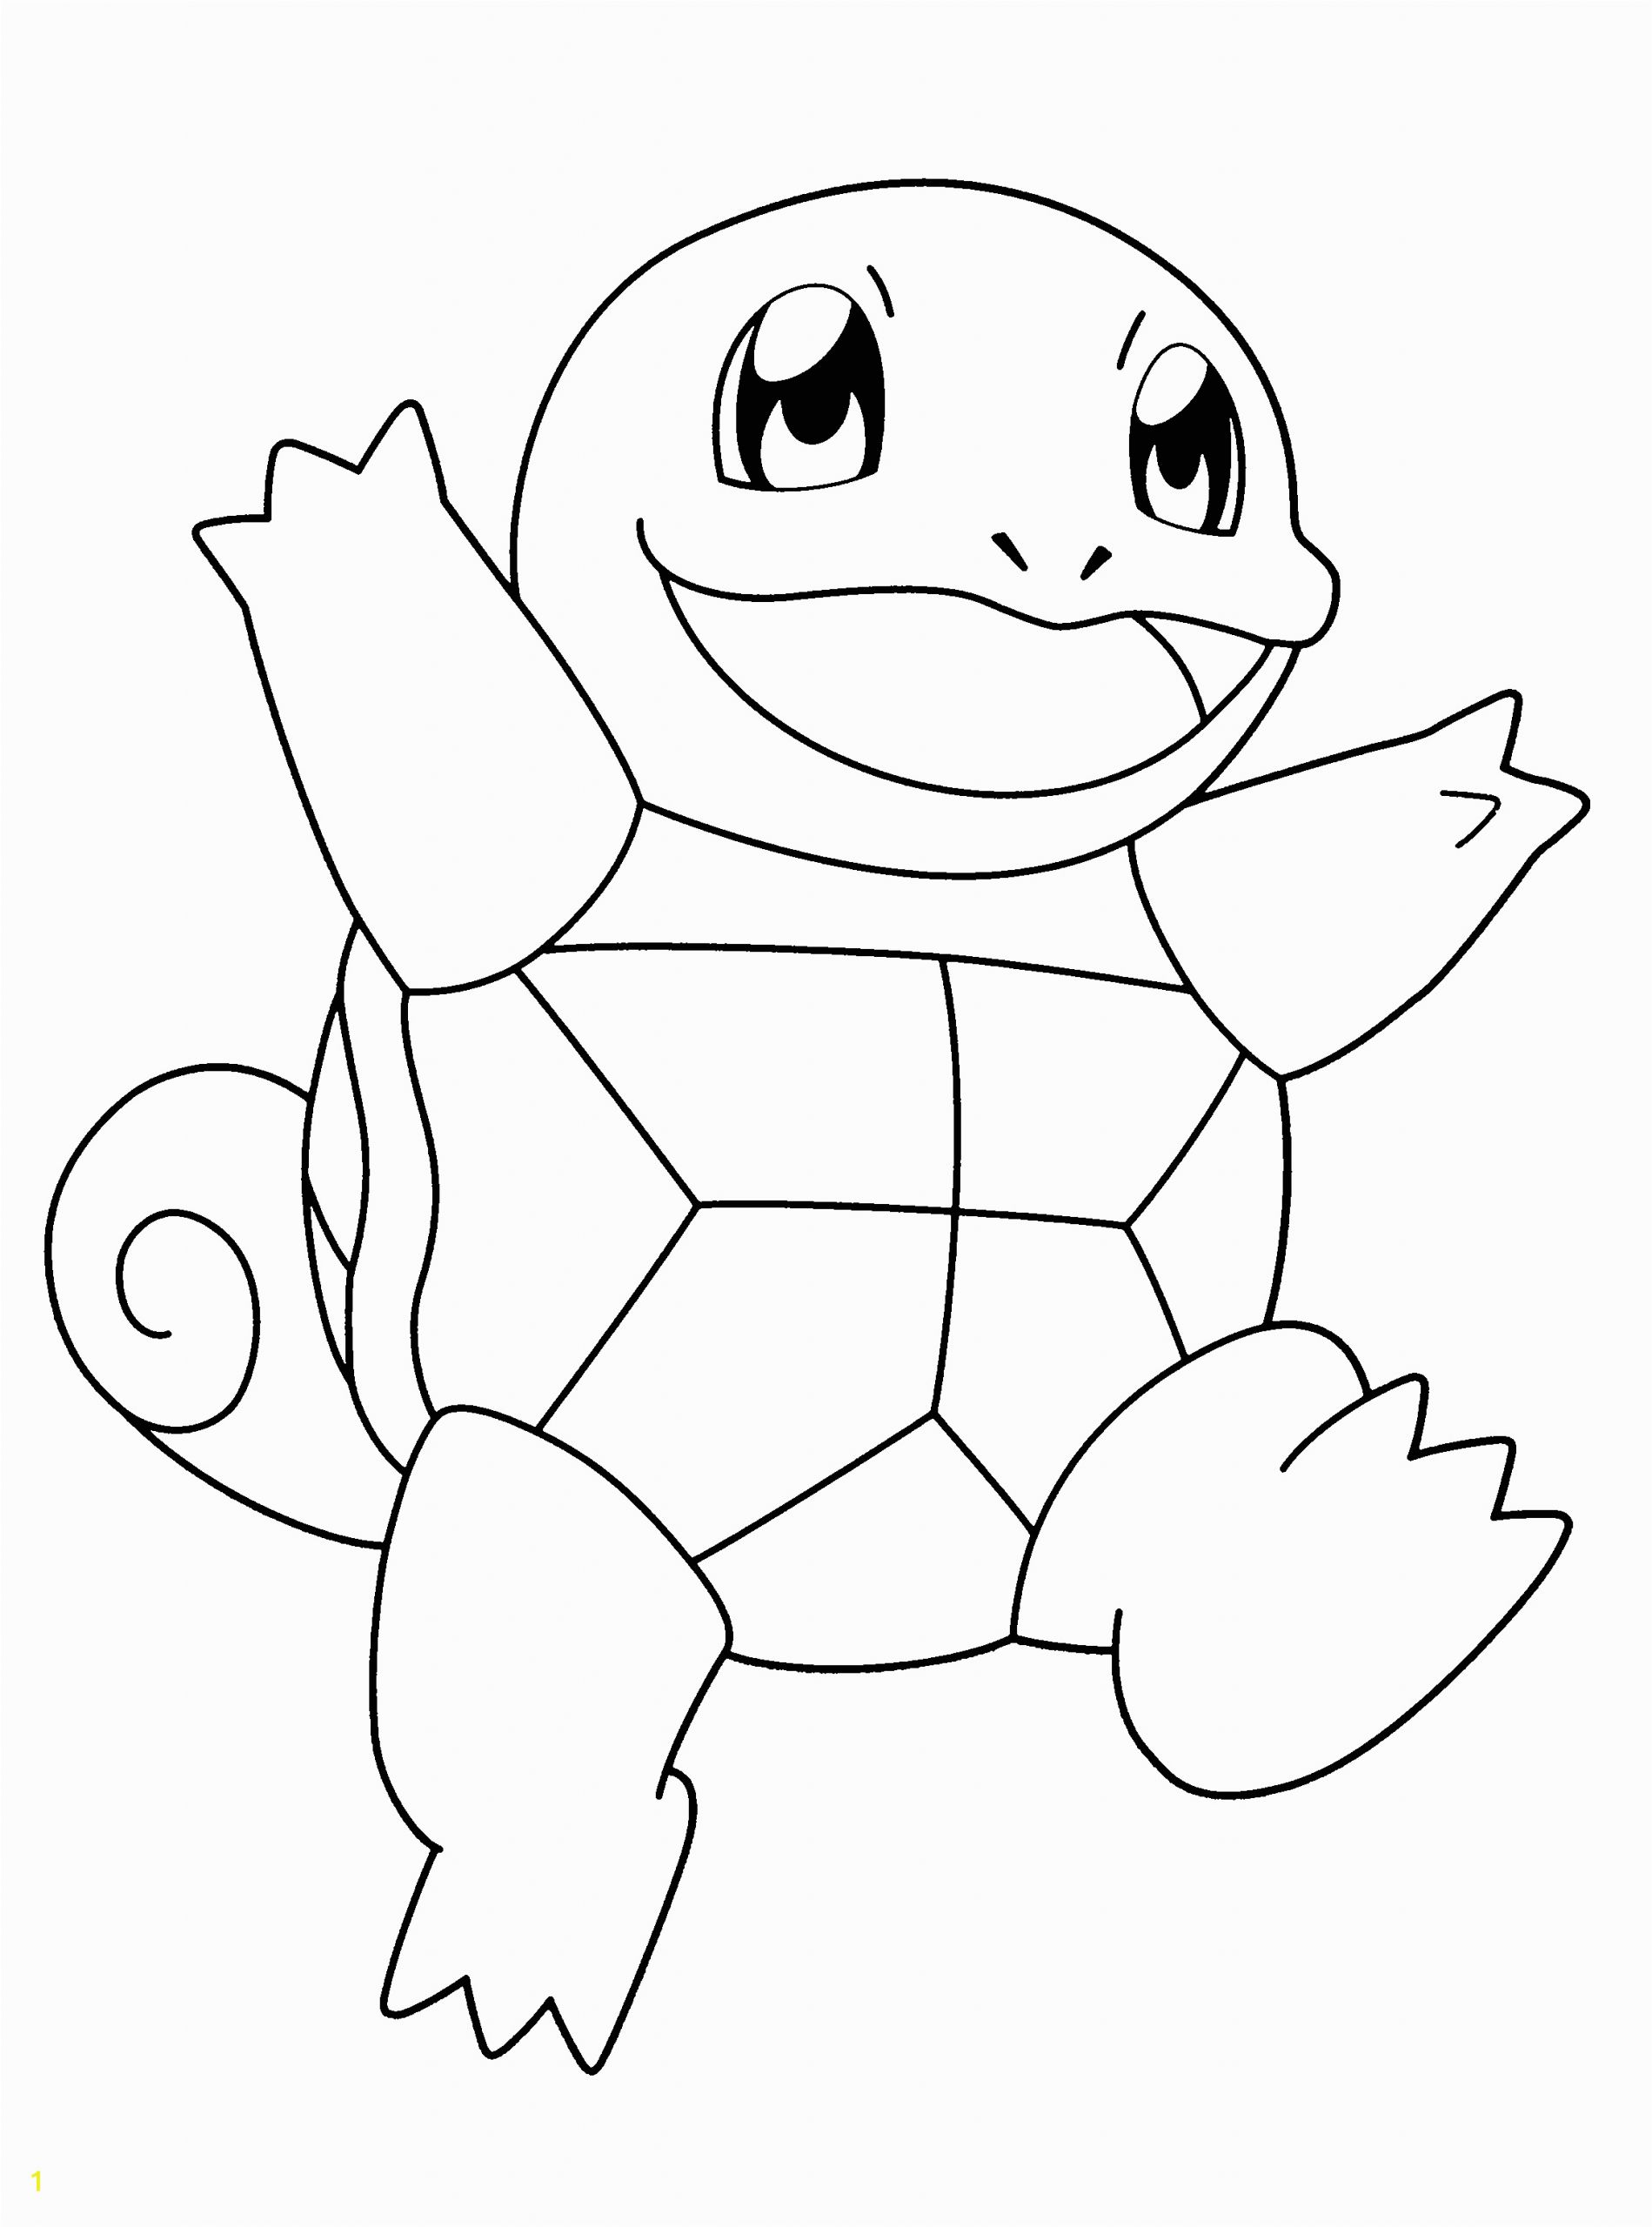 Pokemon Coloring Pages to Print for Free Pokemon Coloring Pages Join Your Favorite Pokemon On An